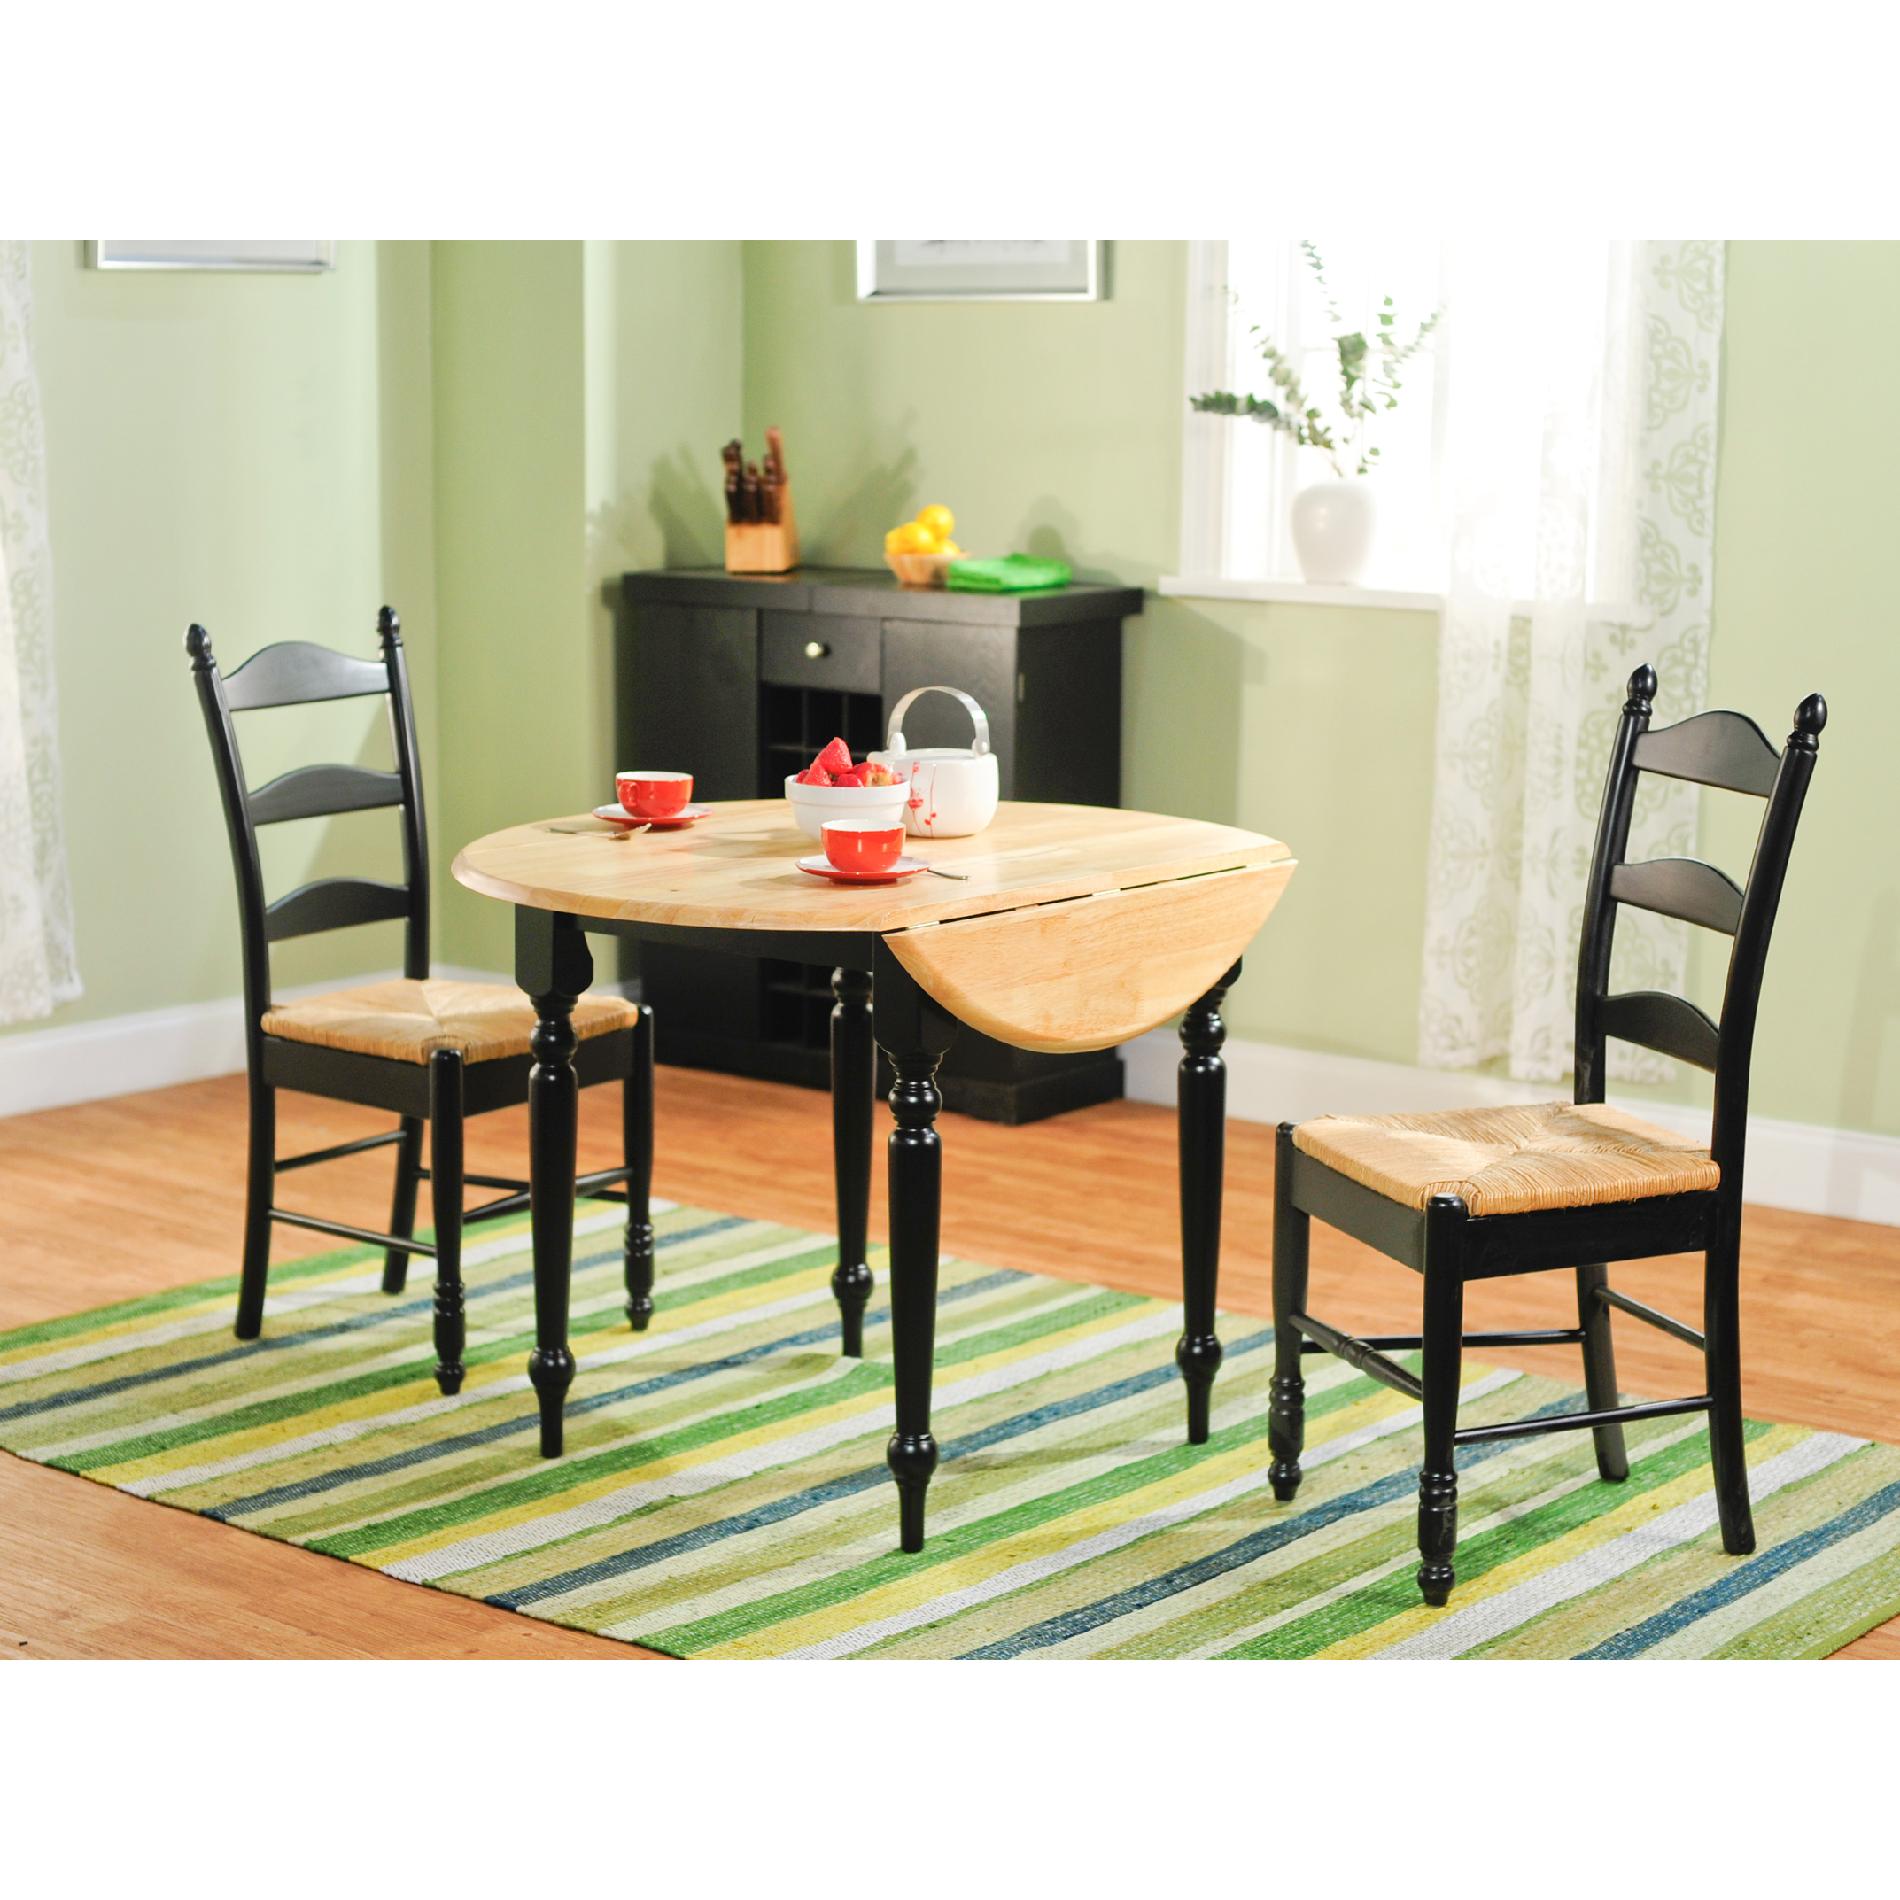 3pc Ladderback dining set in black and natural